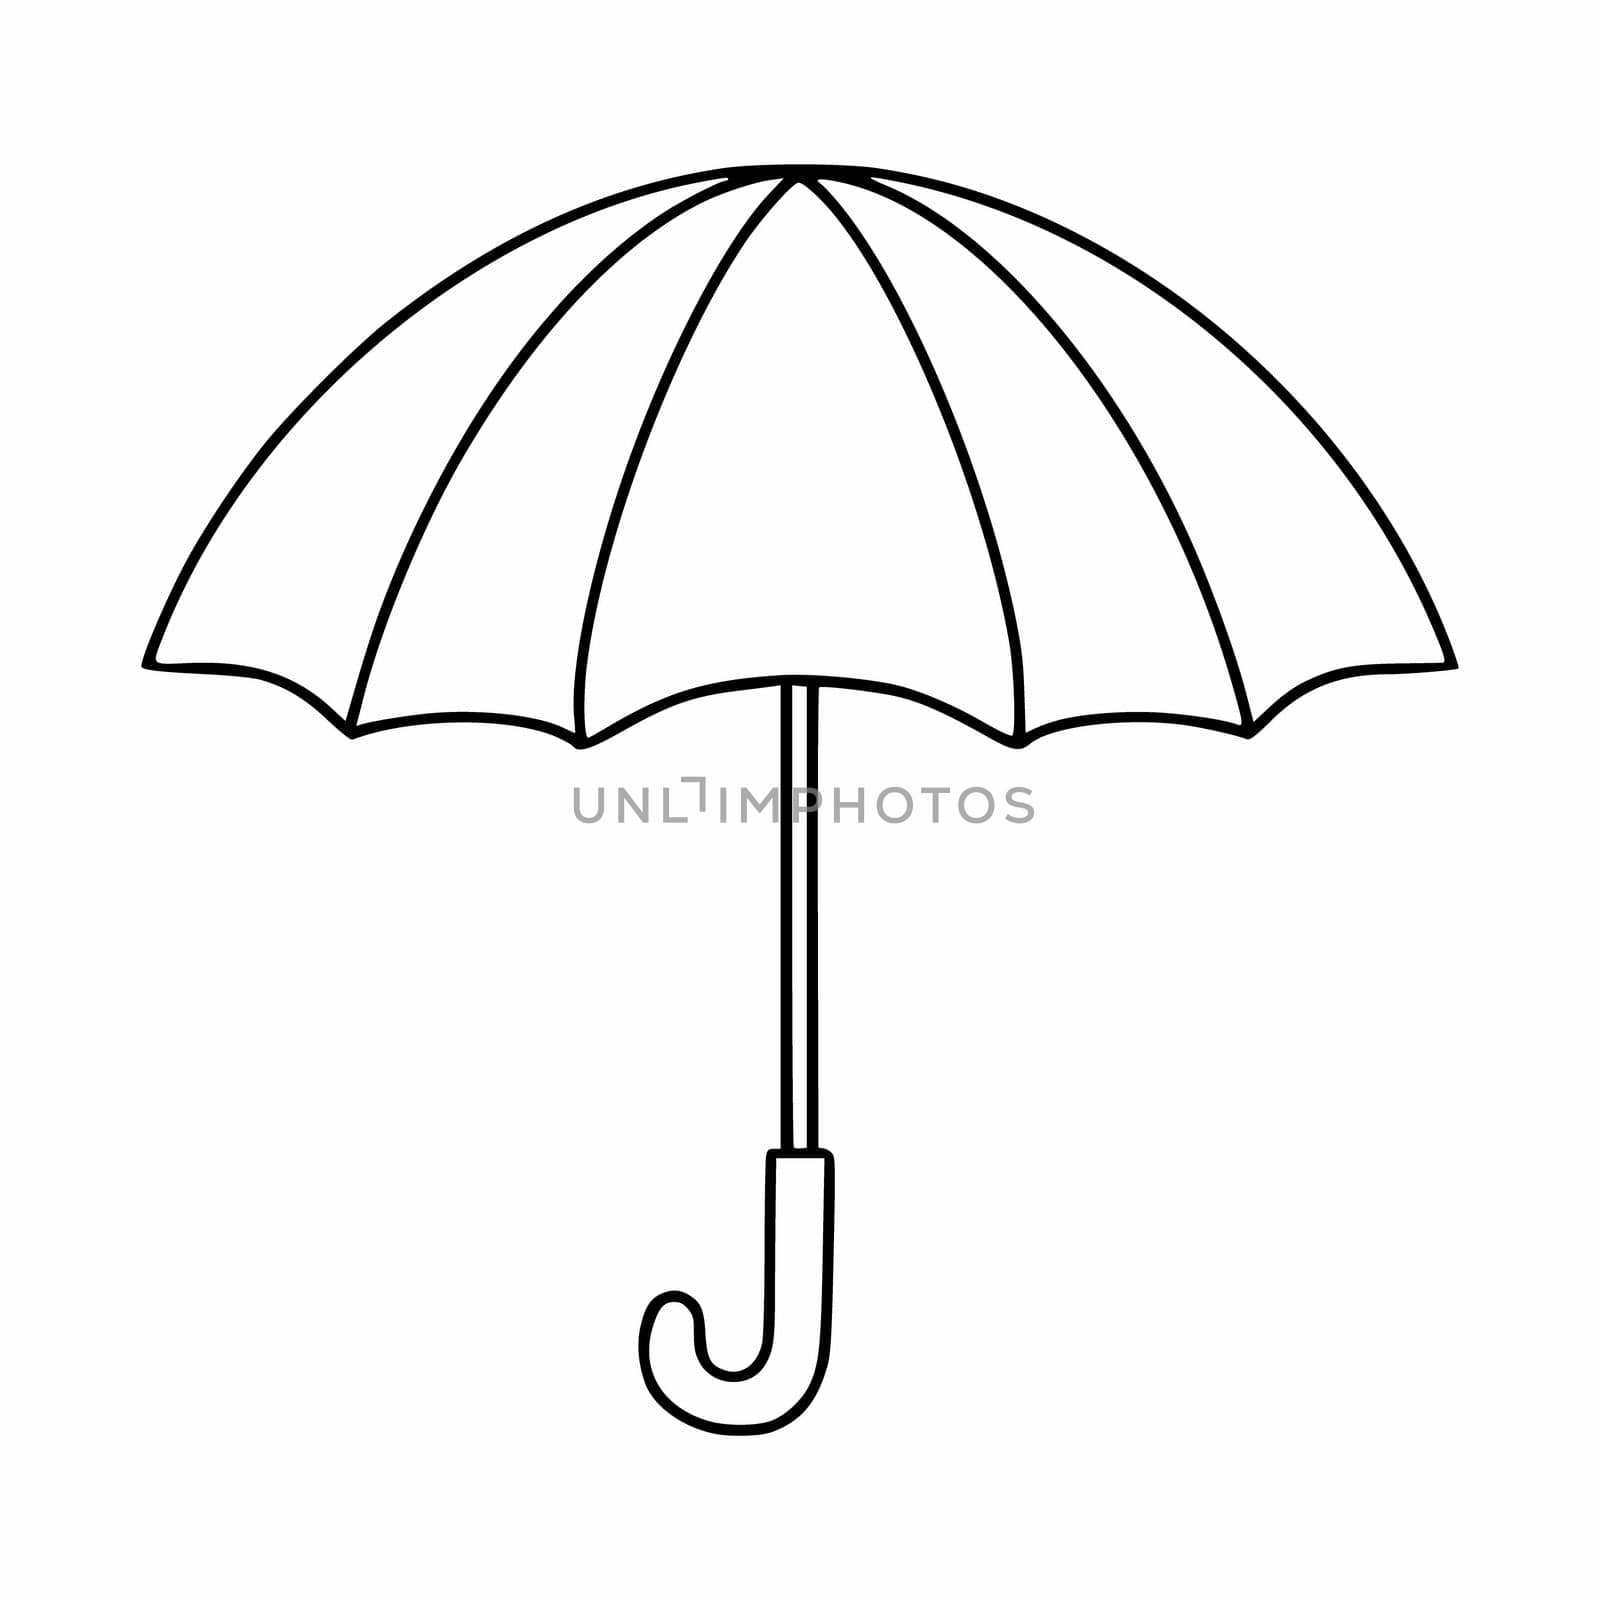 Sun and rain umbrella drawn with a contour line. Vector icon in the doodle style.